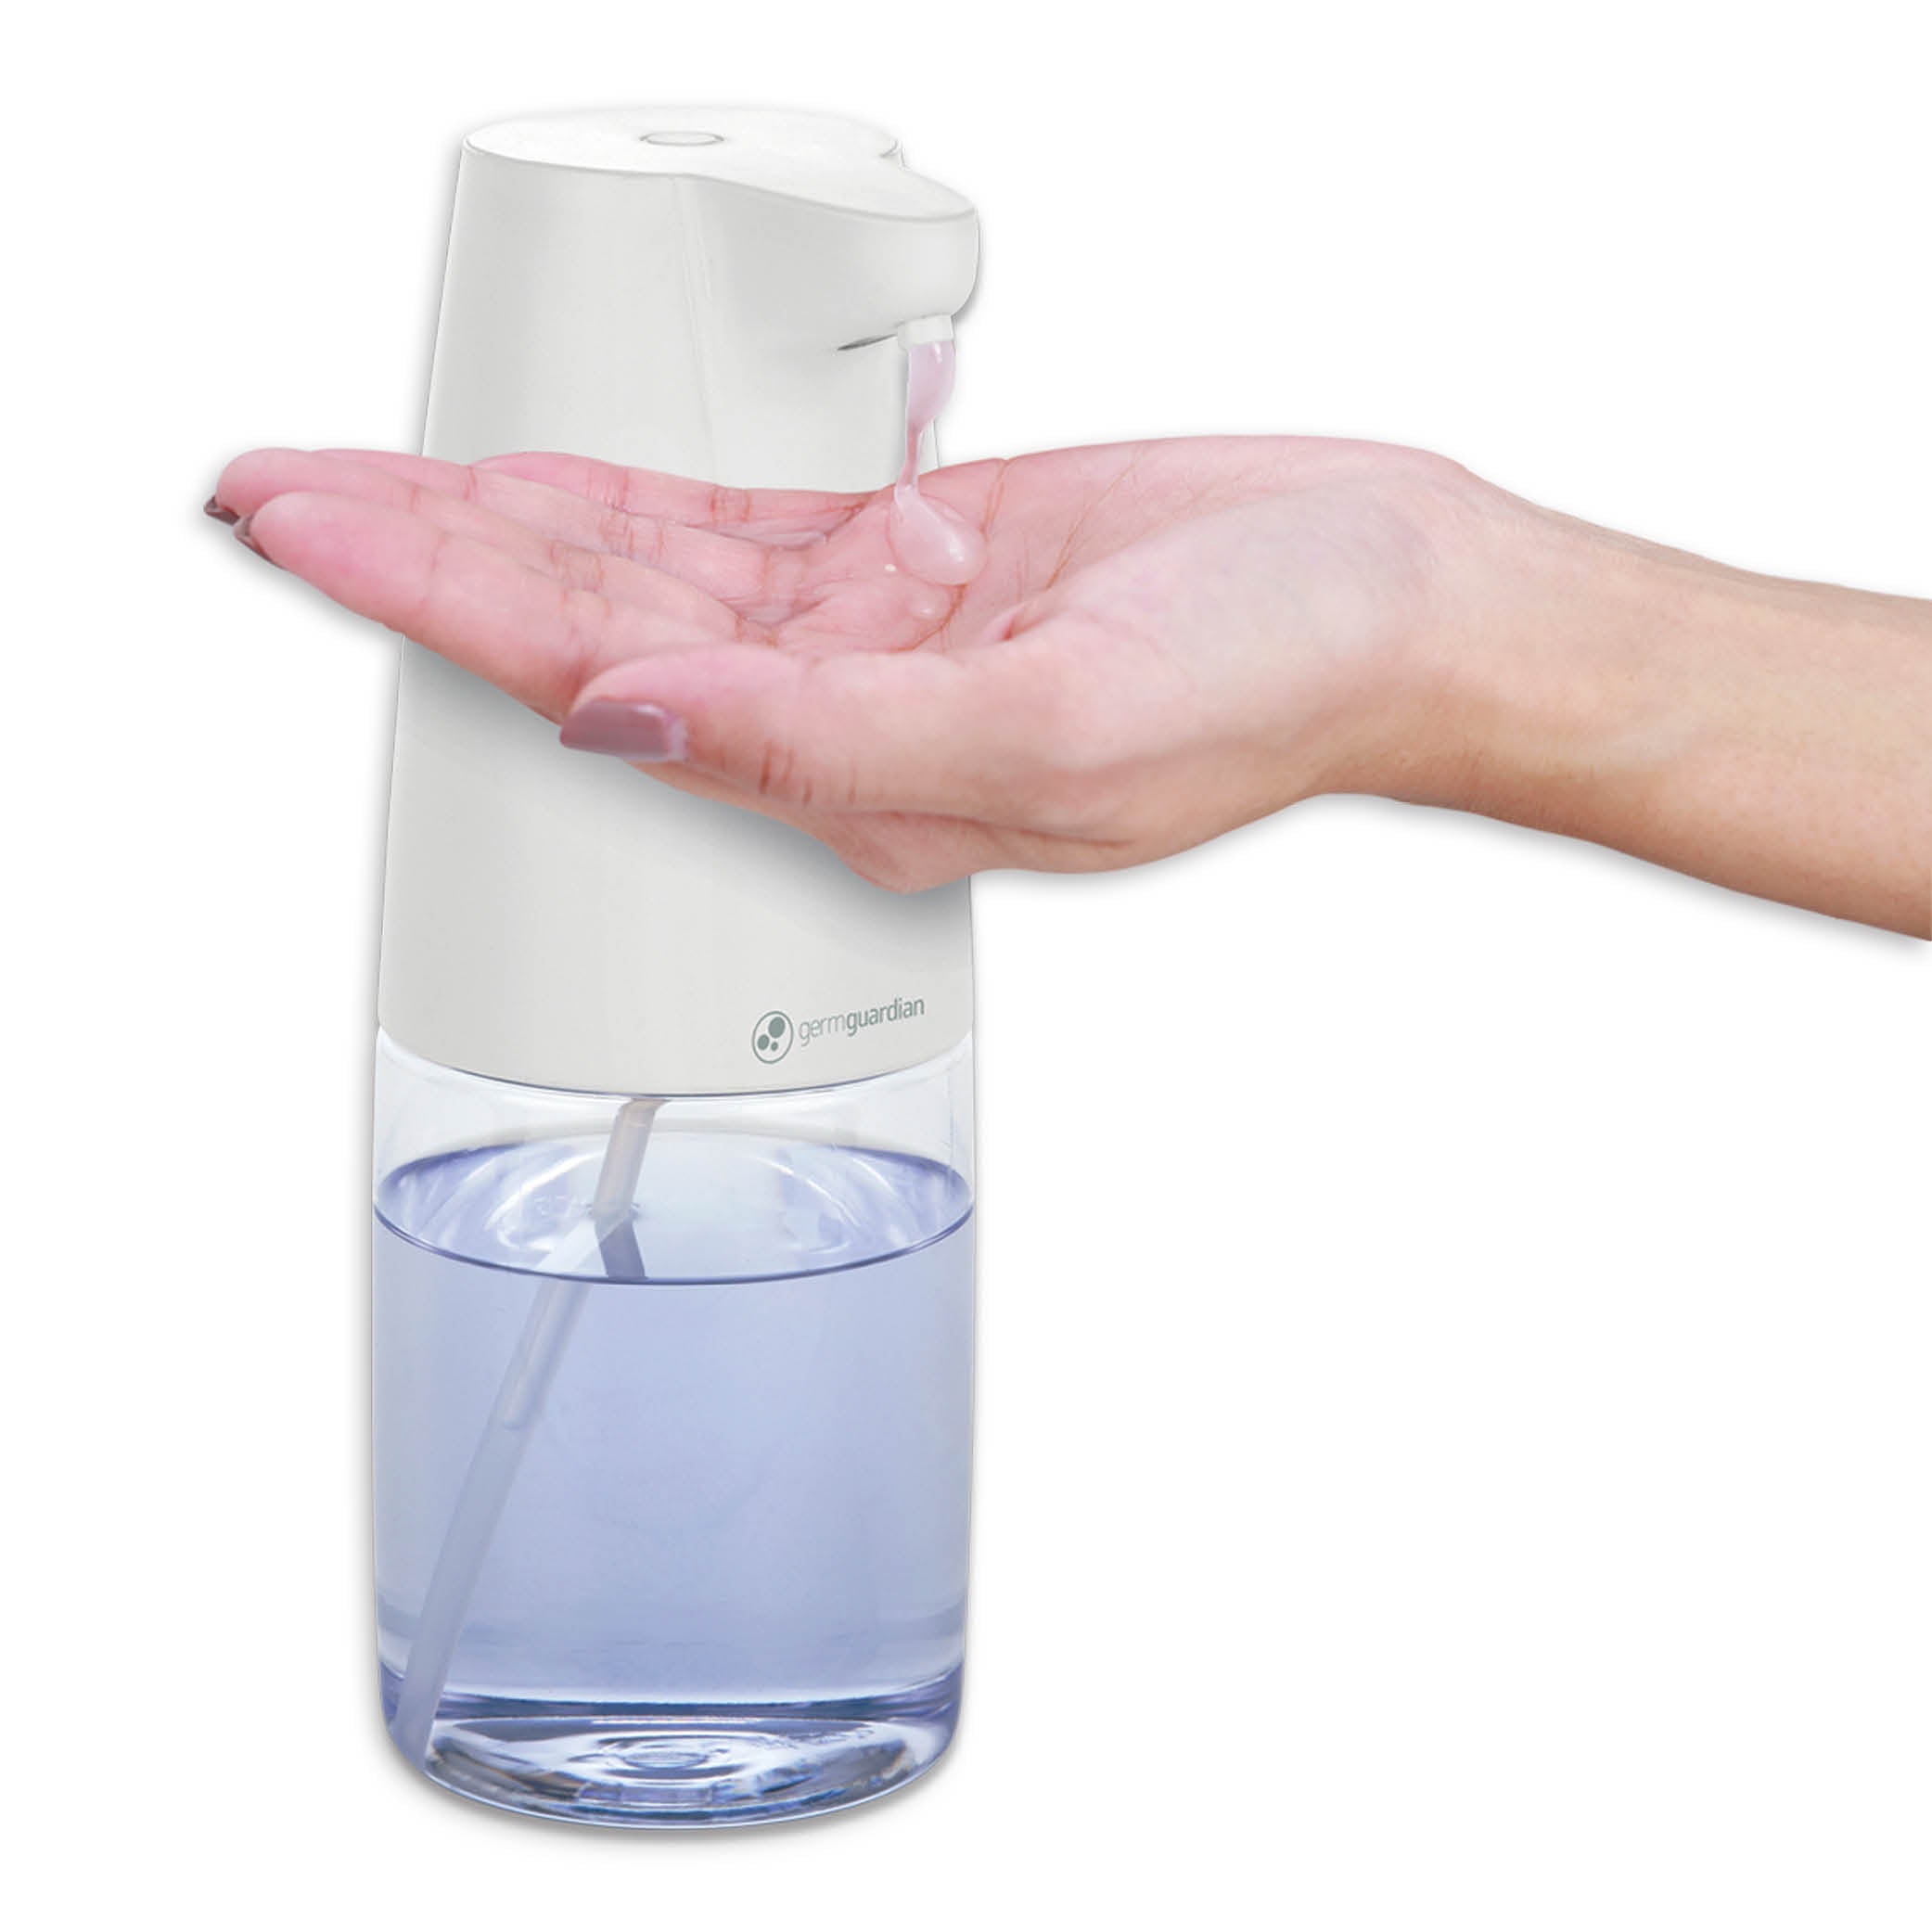 GermGuardian SD410 Automatic Hands Free Soap and Sanitizer Dispenser for Office, School home and more, Large Capacity 500ml